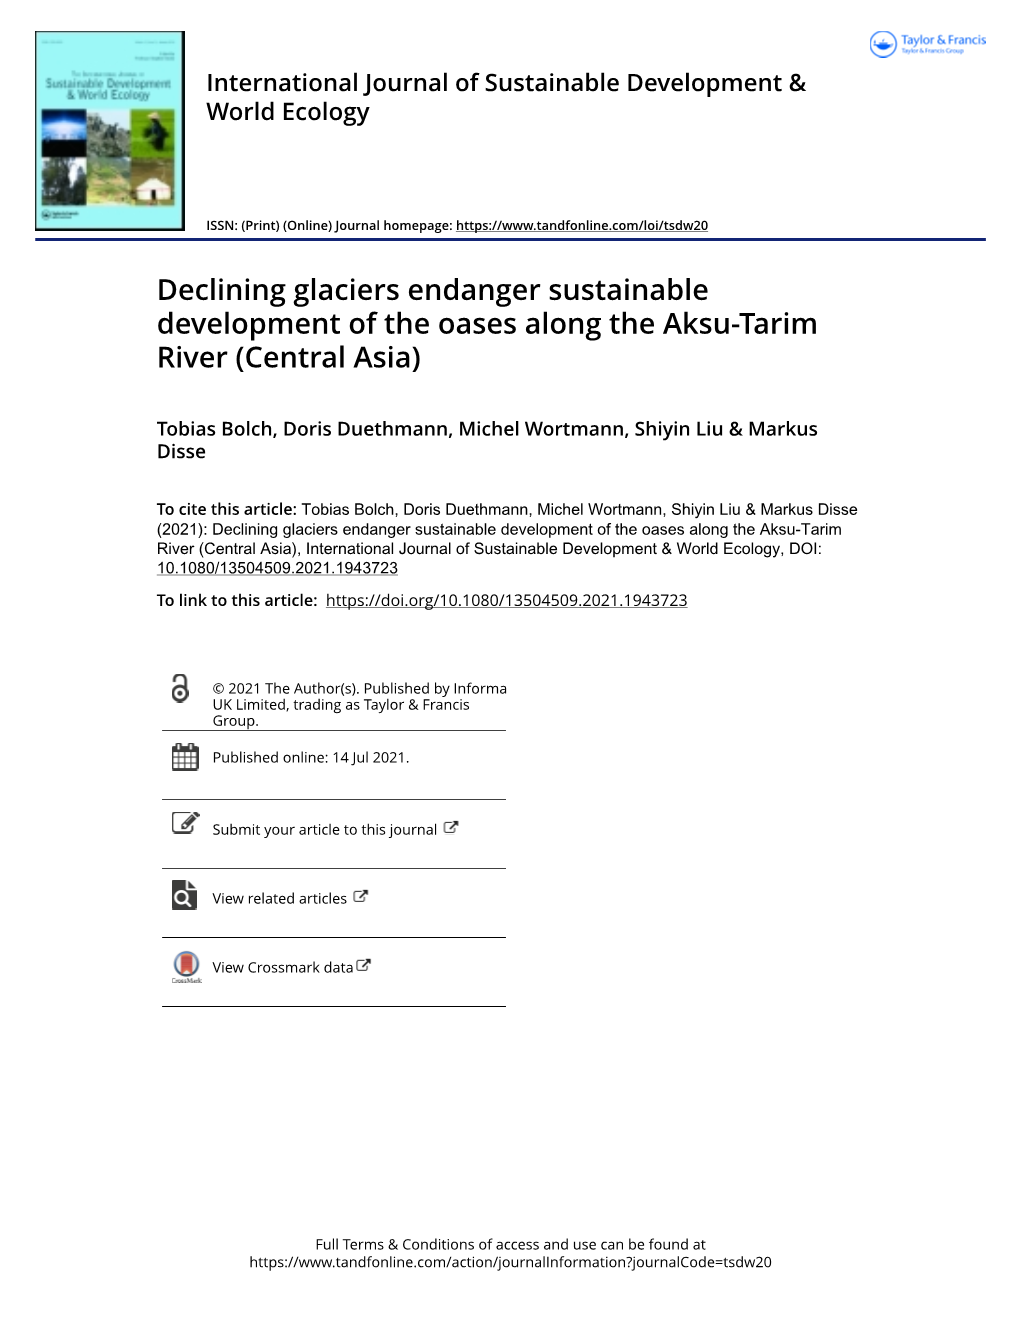 Declining Glaciers Endanger Sustainable Development of the Oases Along the Aksu-Tarim River (Central Asia)